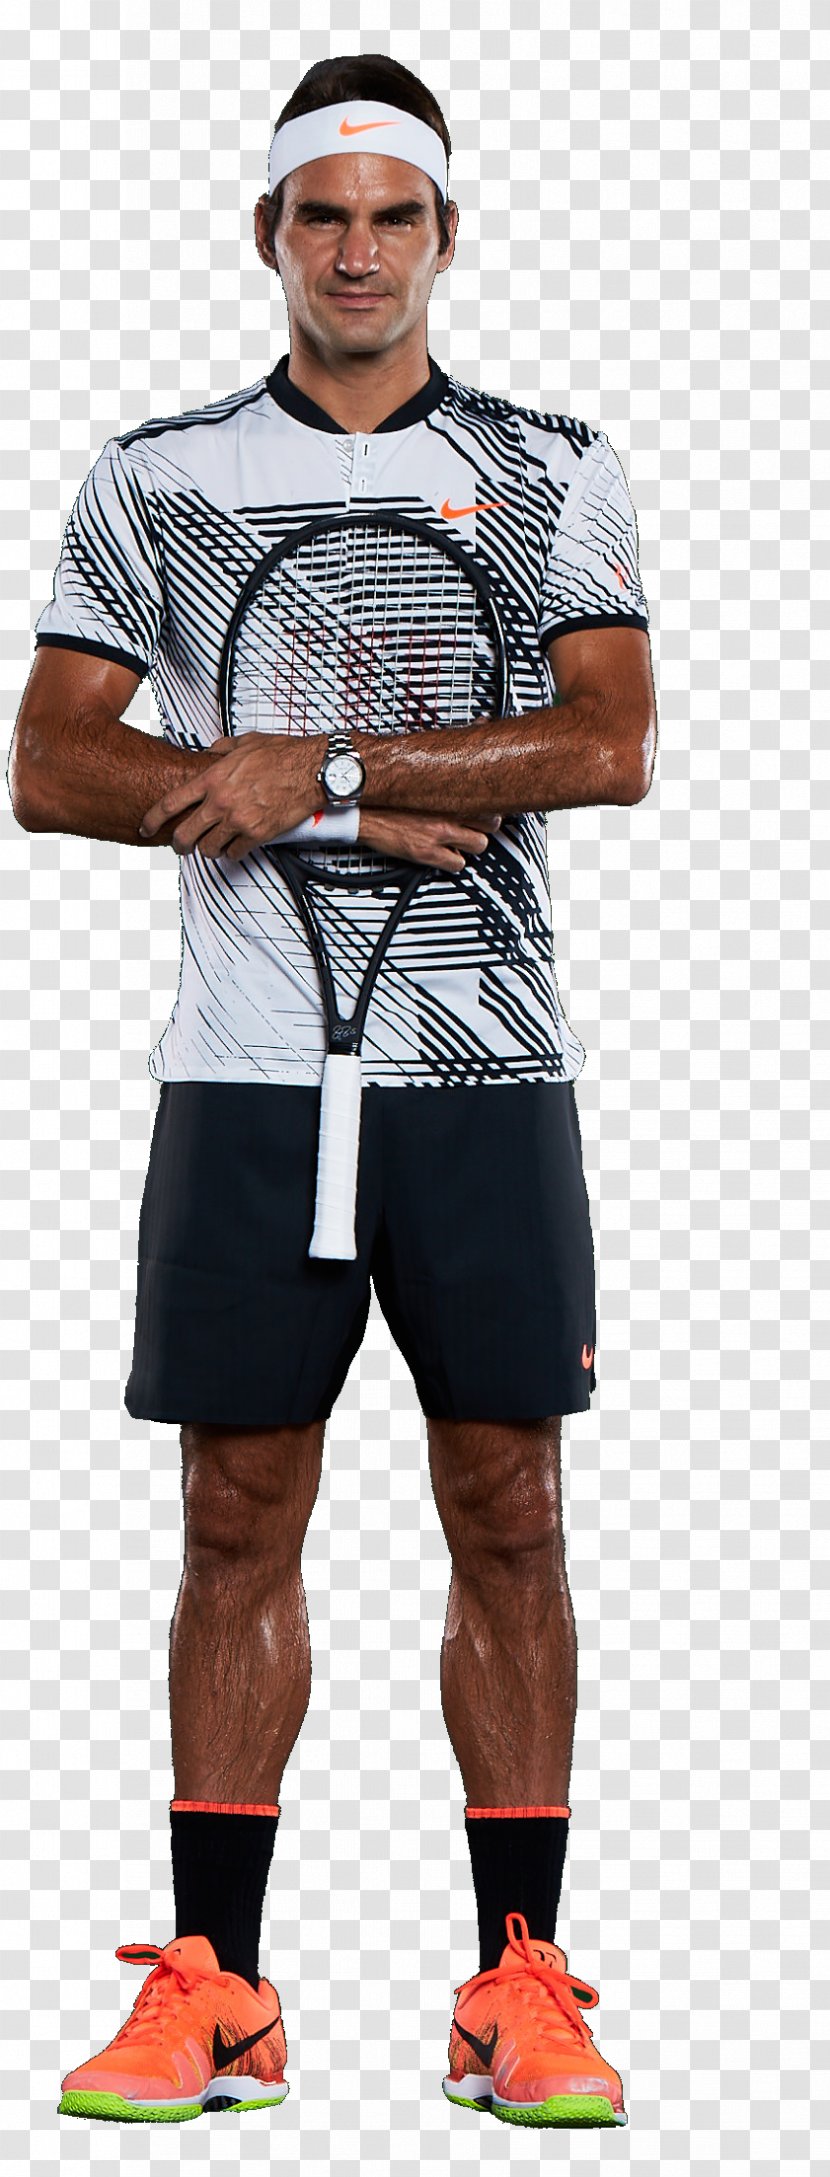 Roger Federer Foundation Australian Open 2017 Match For Africa And Joining Forces The Benefit Of Children 2018 Tennis Season - Shoulder Transparent PNG